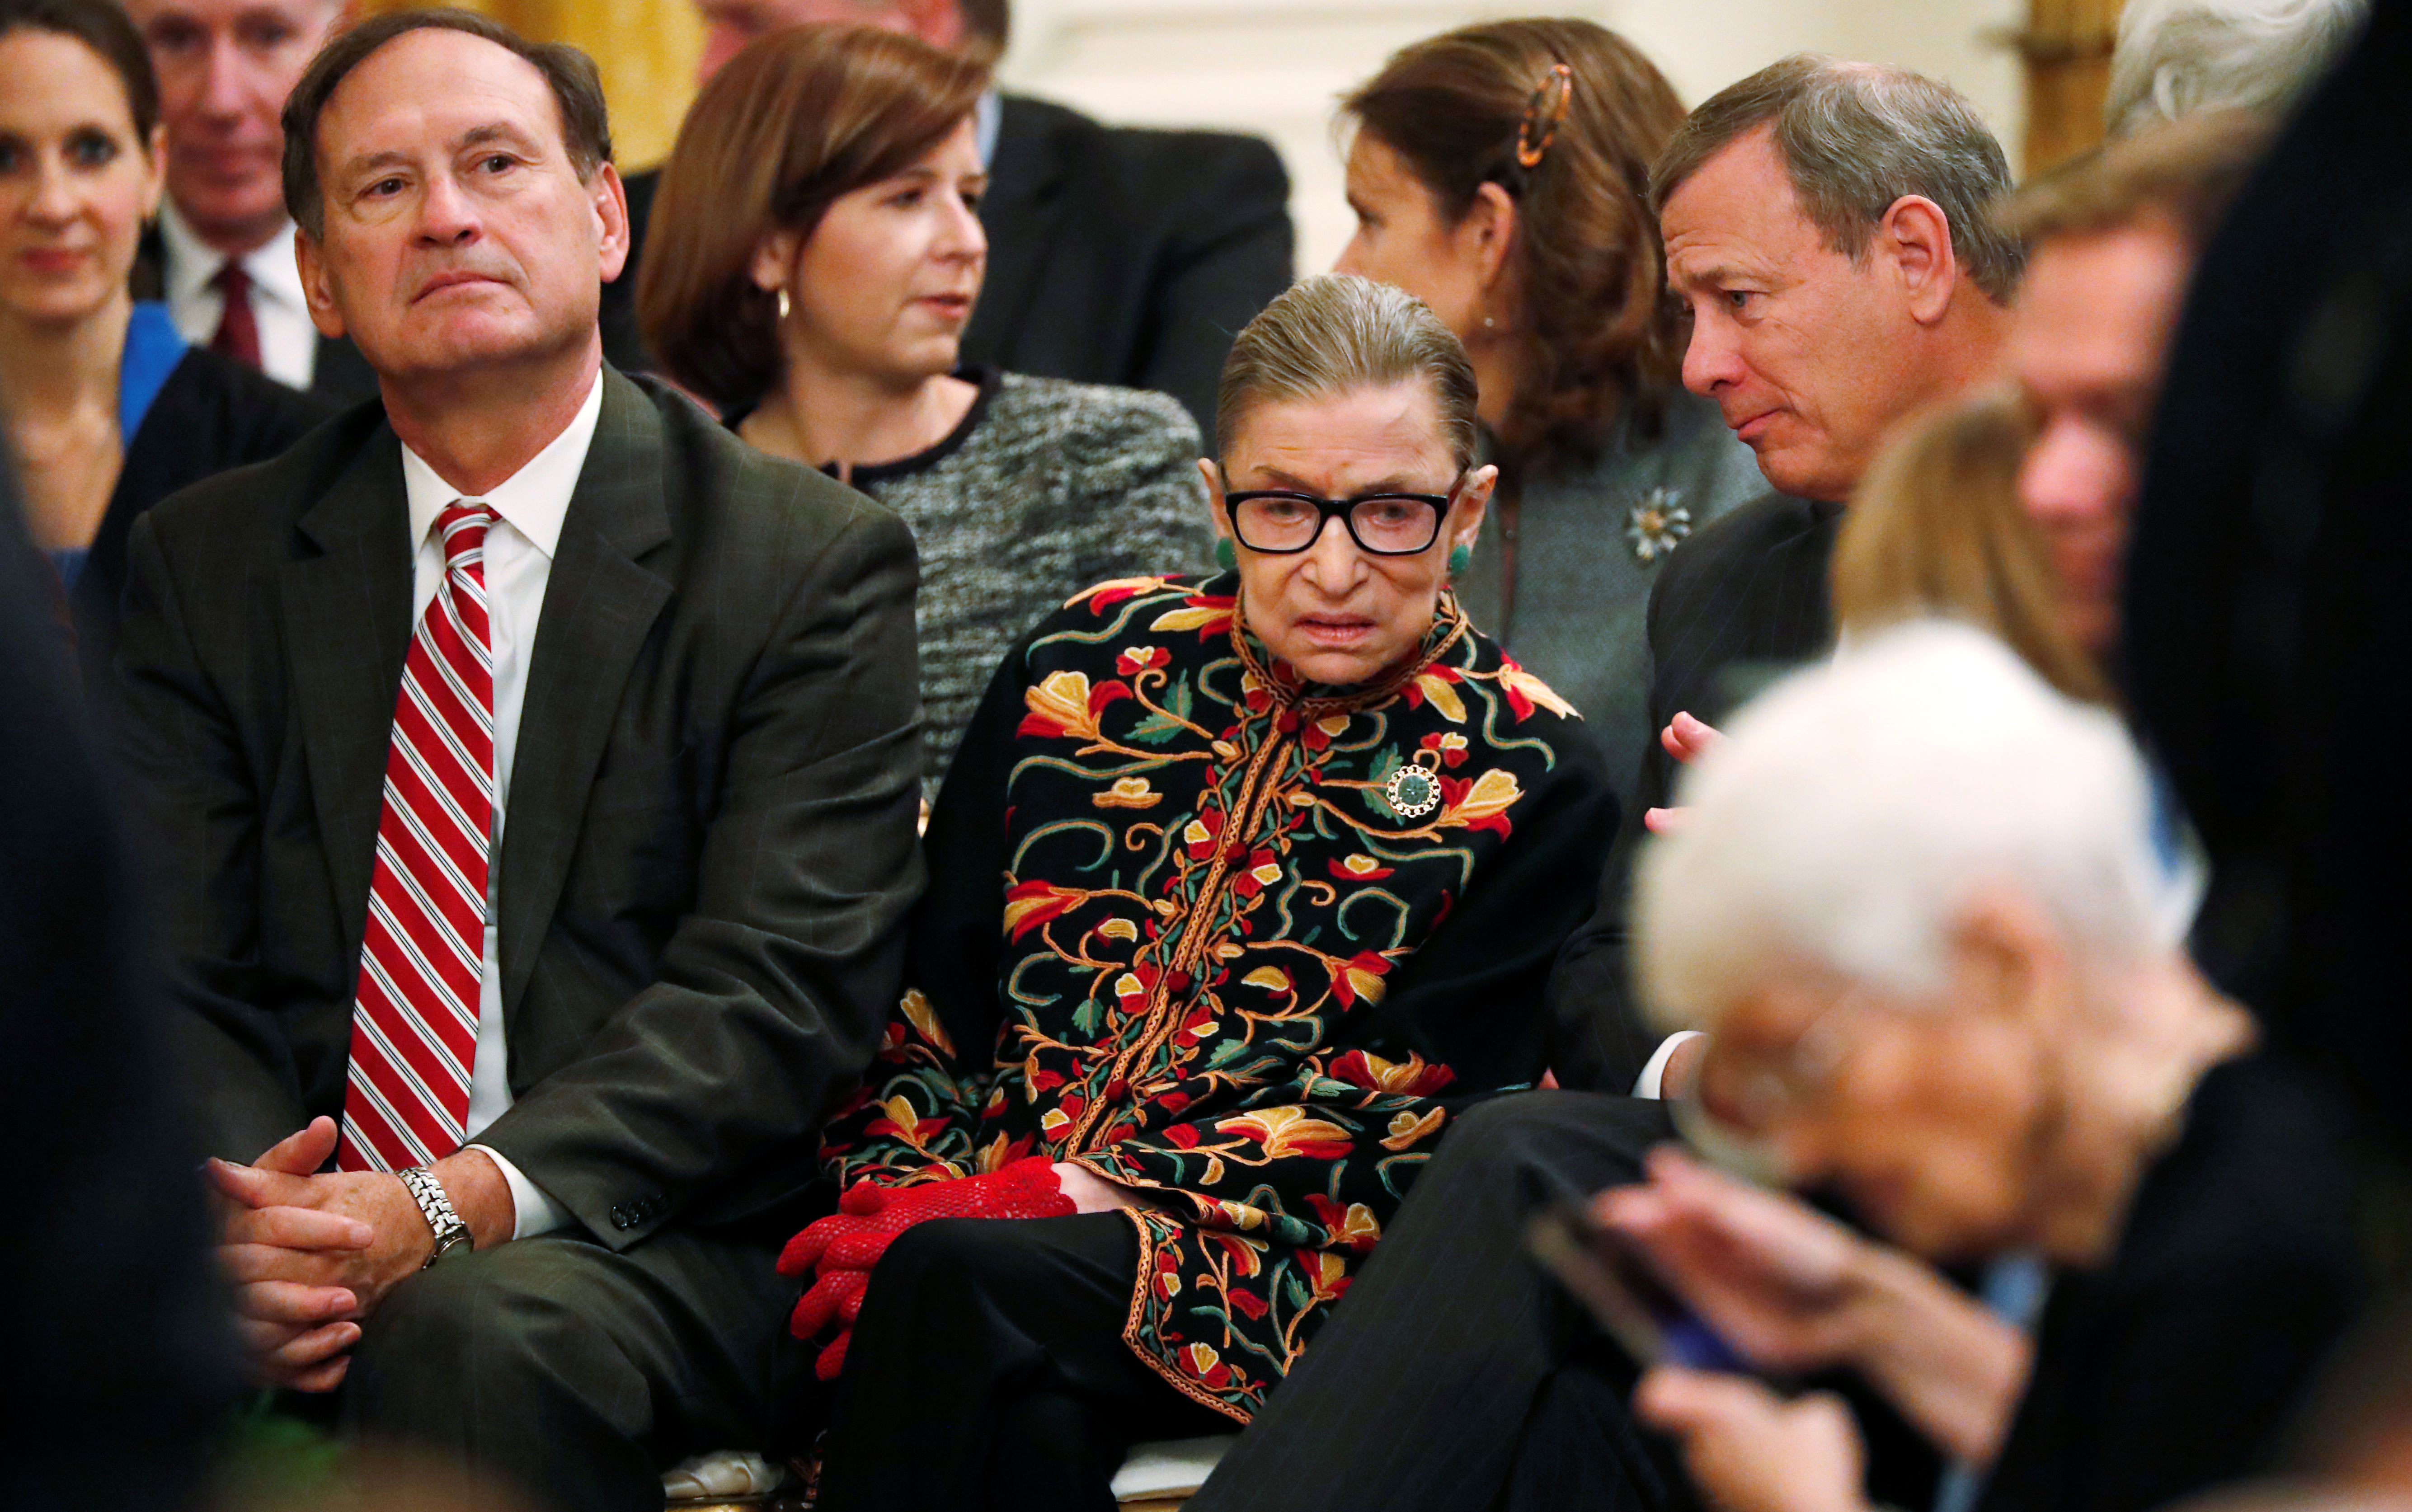 U.S. Supreme Court Associate Justice Ruth Bader Ginsburg talks with Chief Justice John Roberts as sits between Roberts and Associate Justice Samuel Alito as they attend a ceremony where President Donald Trump awarded the 2018 Presidential Medals of Freedom in the East Room of the White House in Washington, U.S. November 16, 2018. REUTERS/Leah Millis